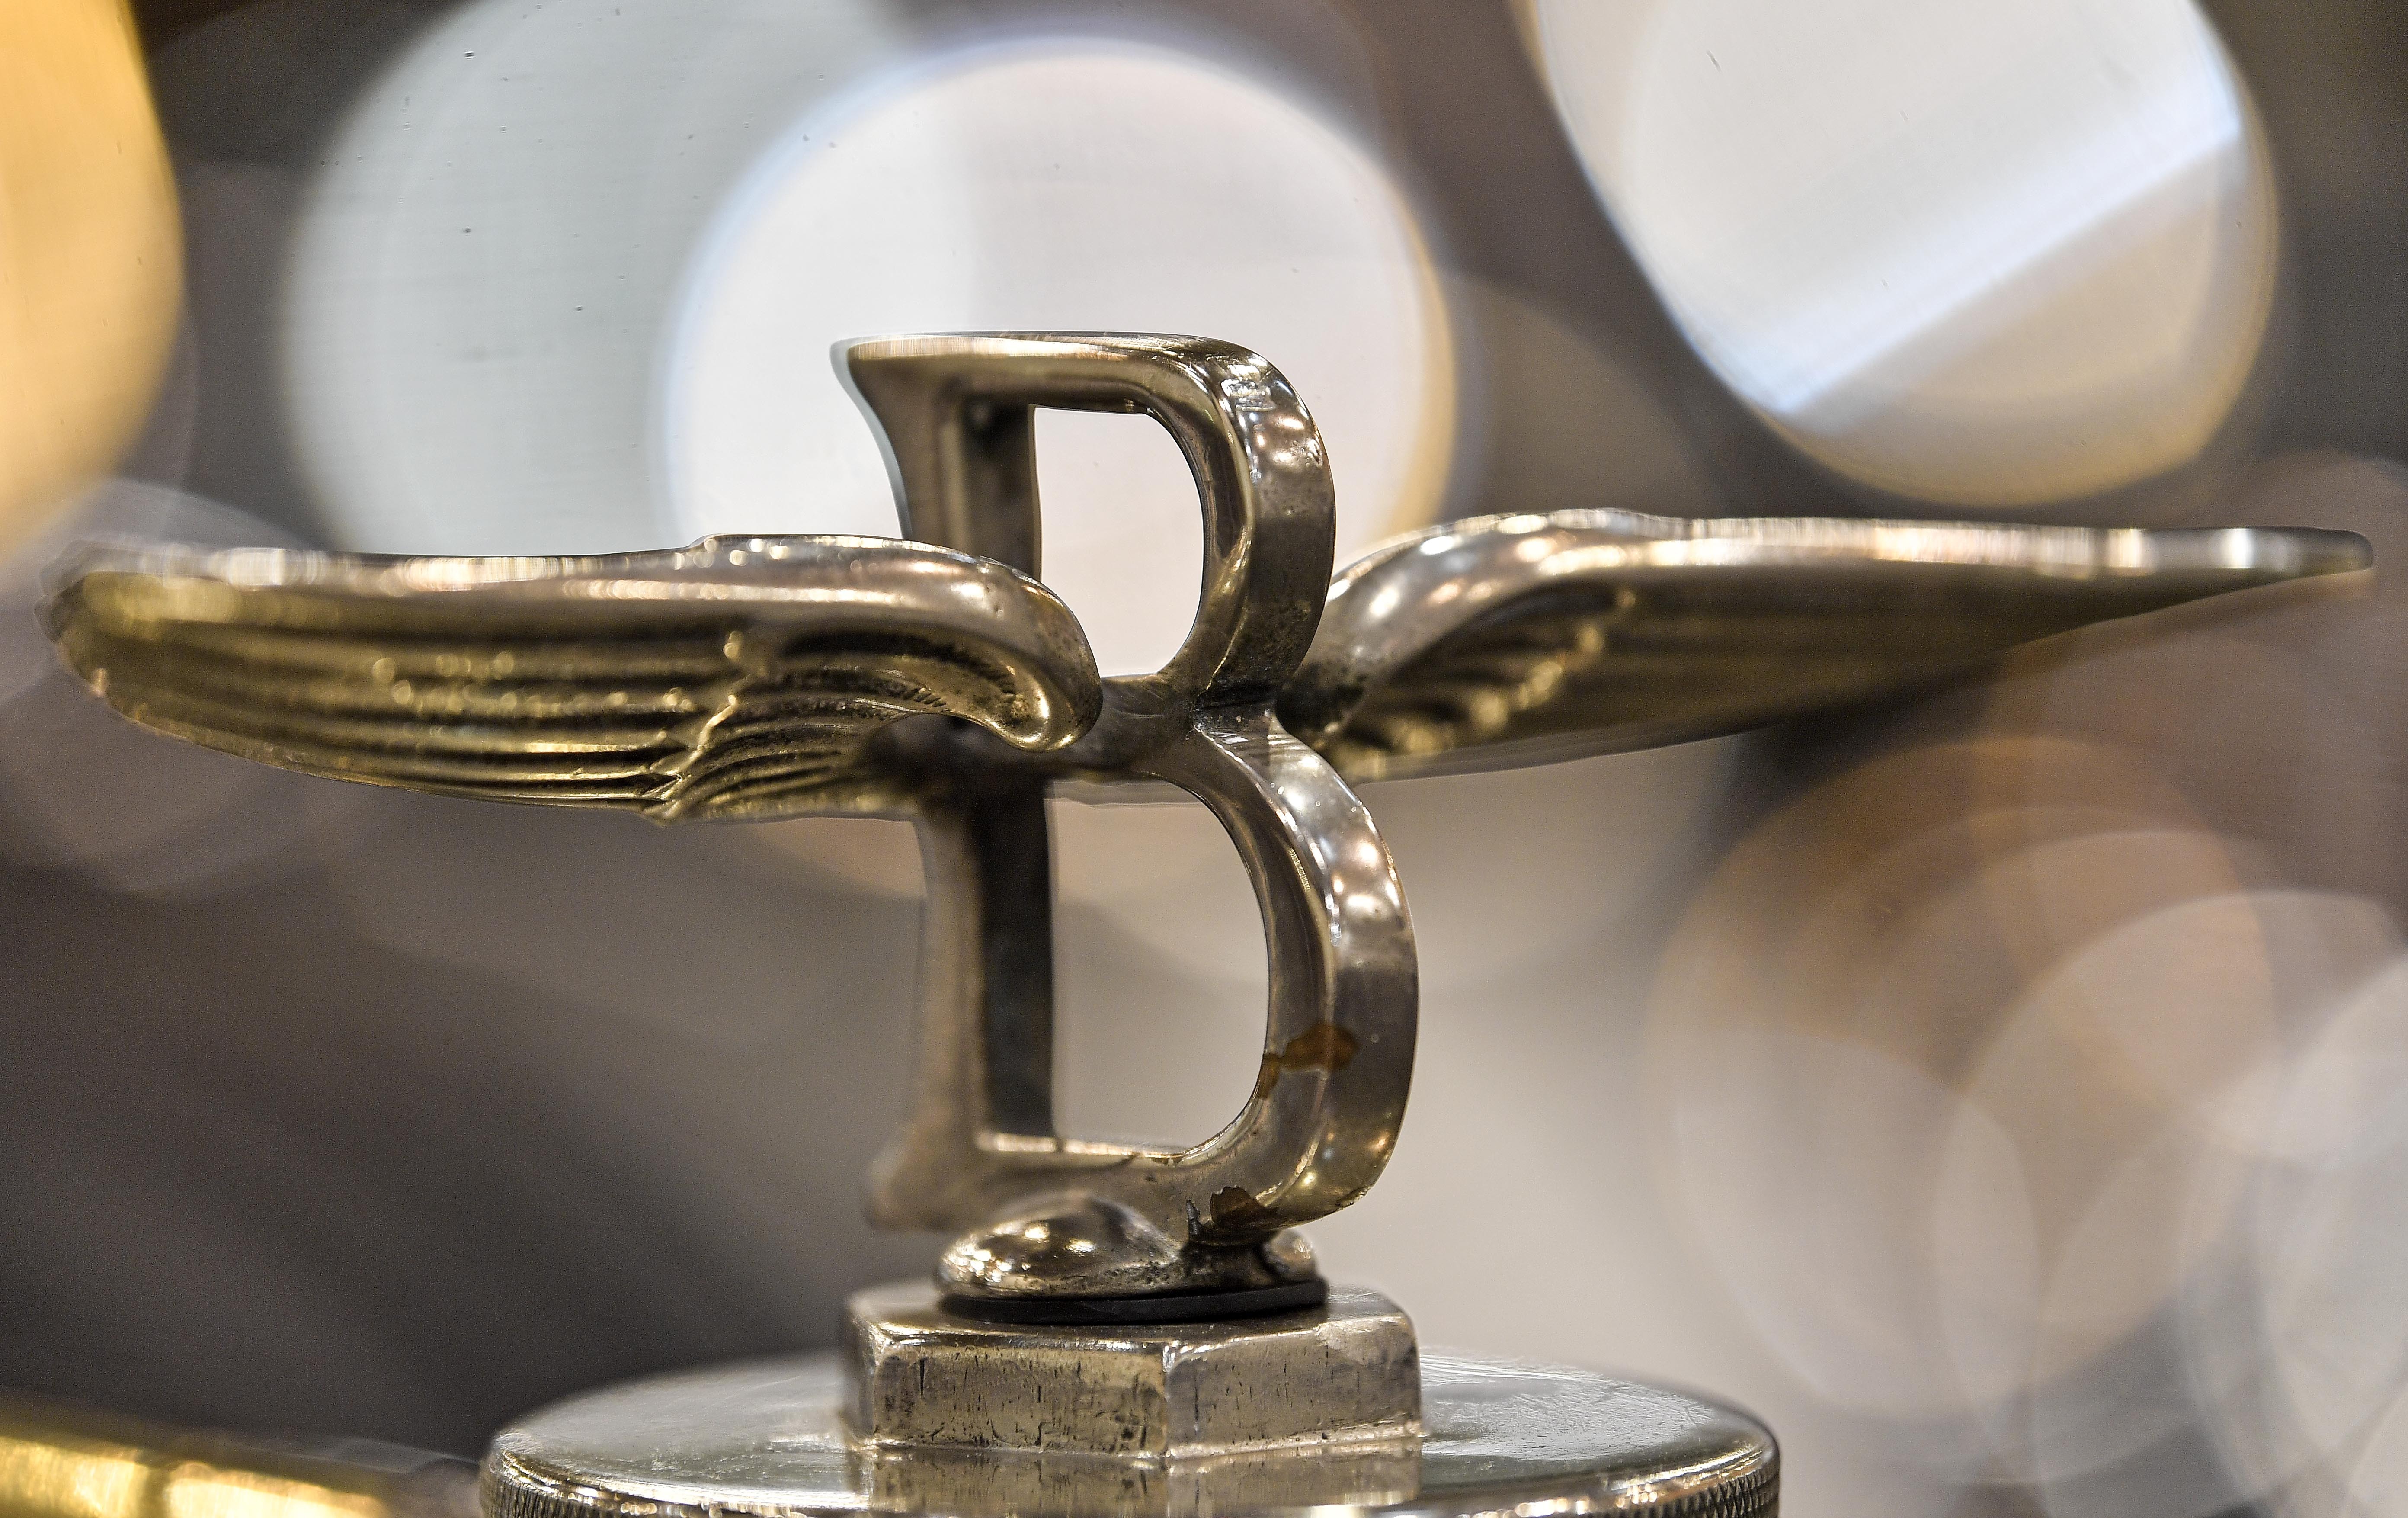 The hood ornament of a vintage Bentley car is seen at the World Show for Vintage, Classic and Prestige Automobiles Techno-Classica in Essen, Germany, Friday, April 12, 2019. (AP Photo/Martin Meissner)